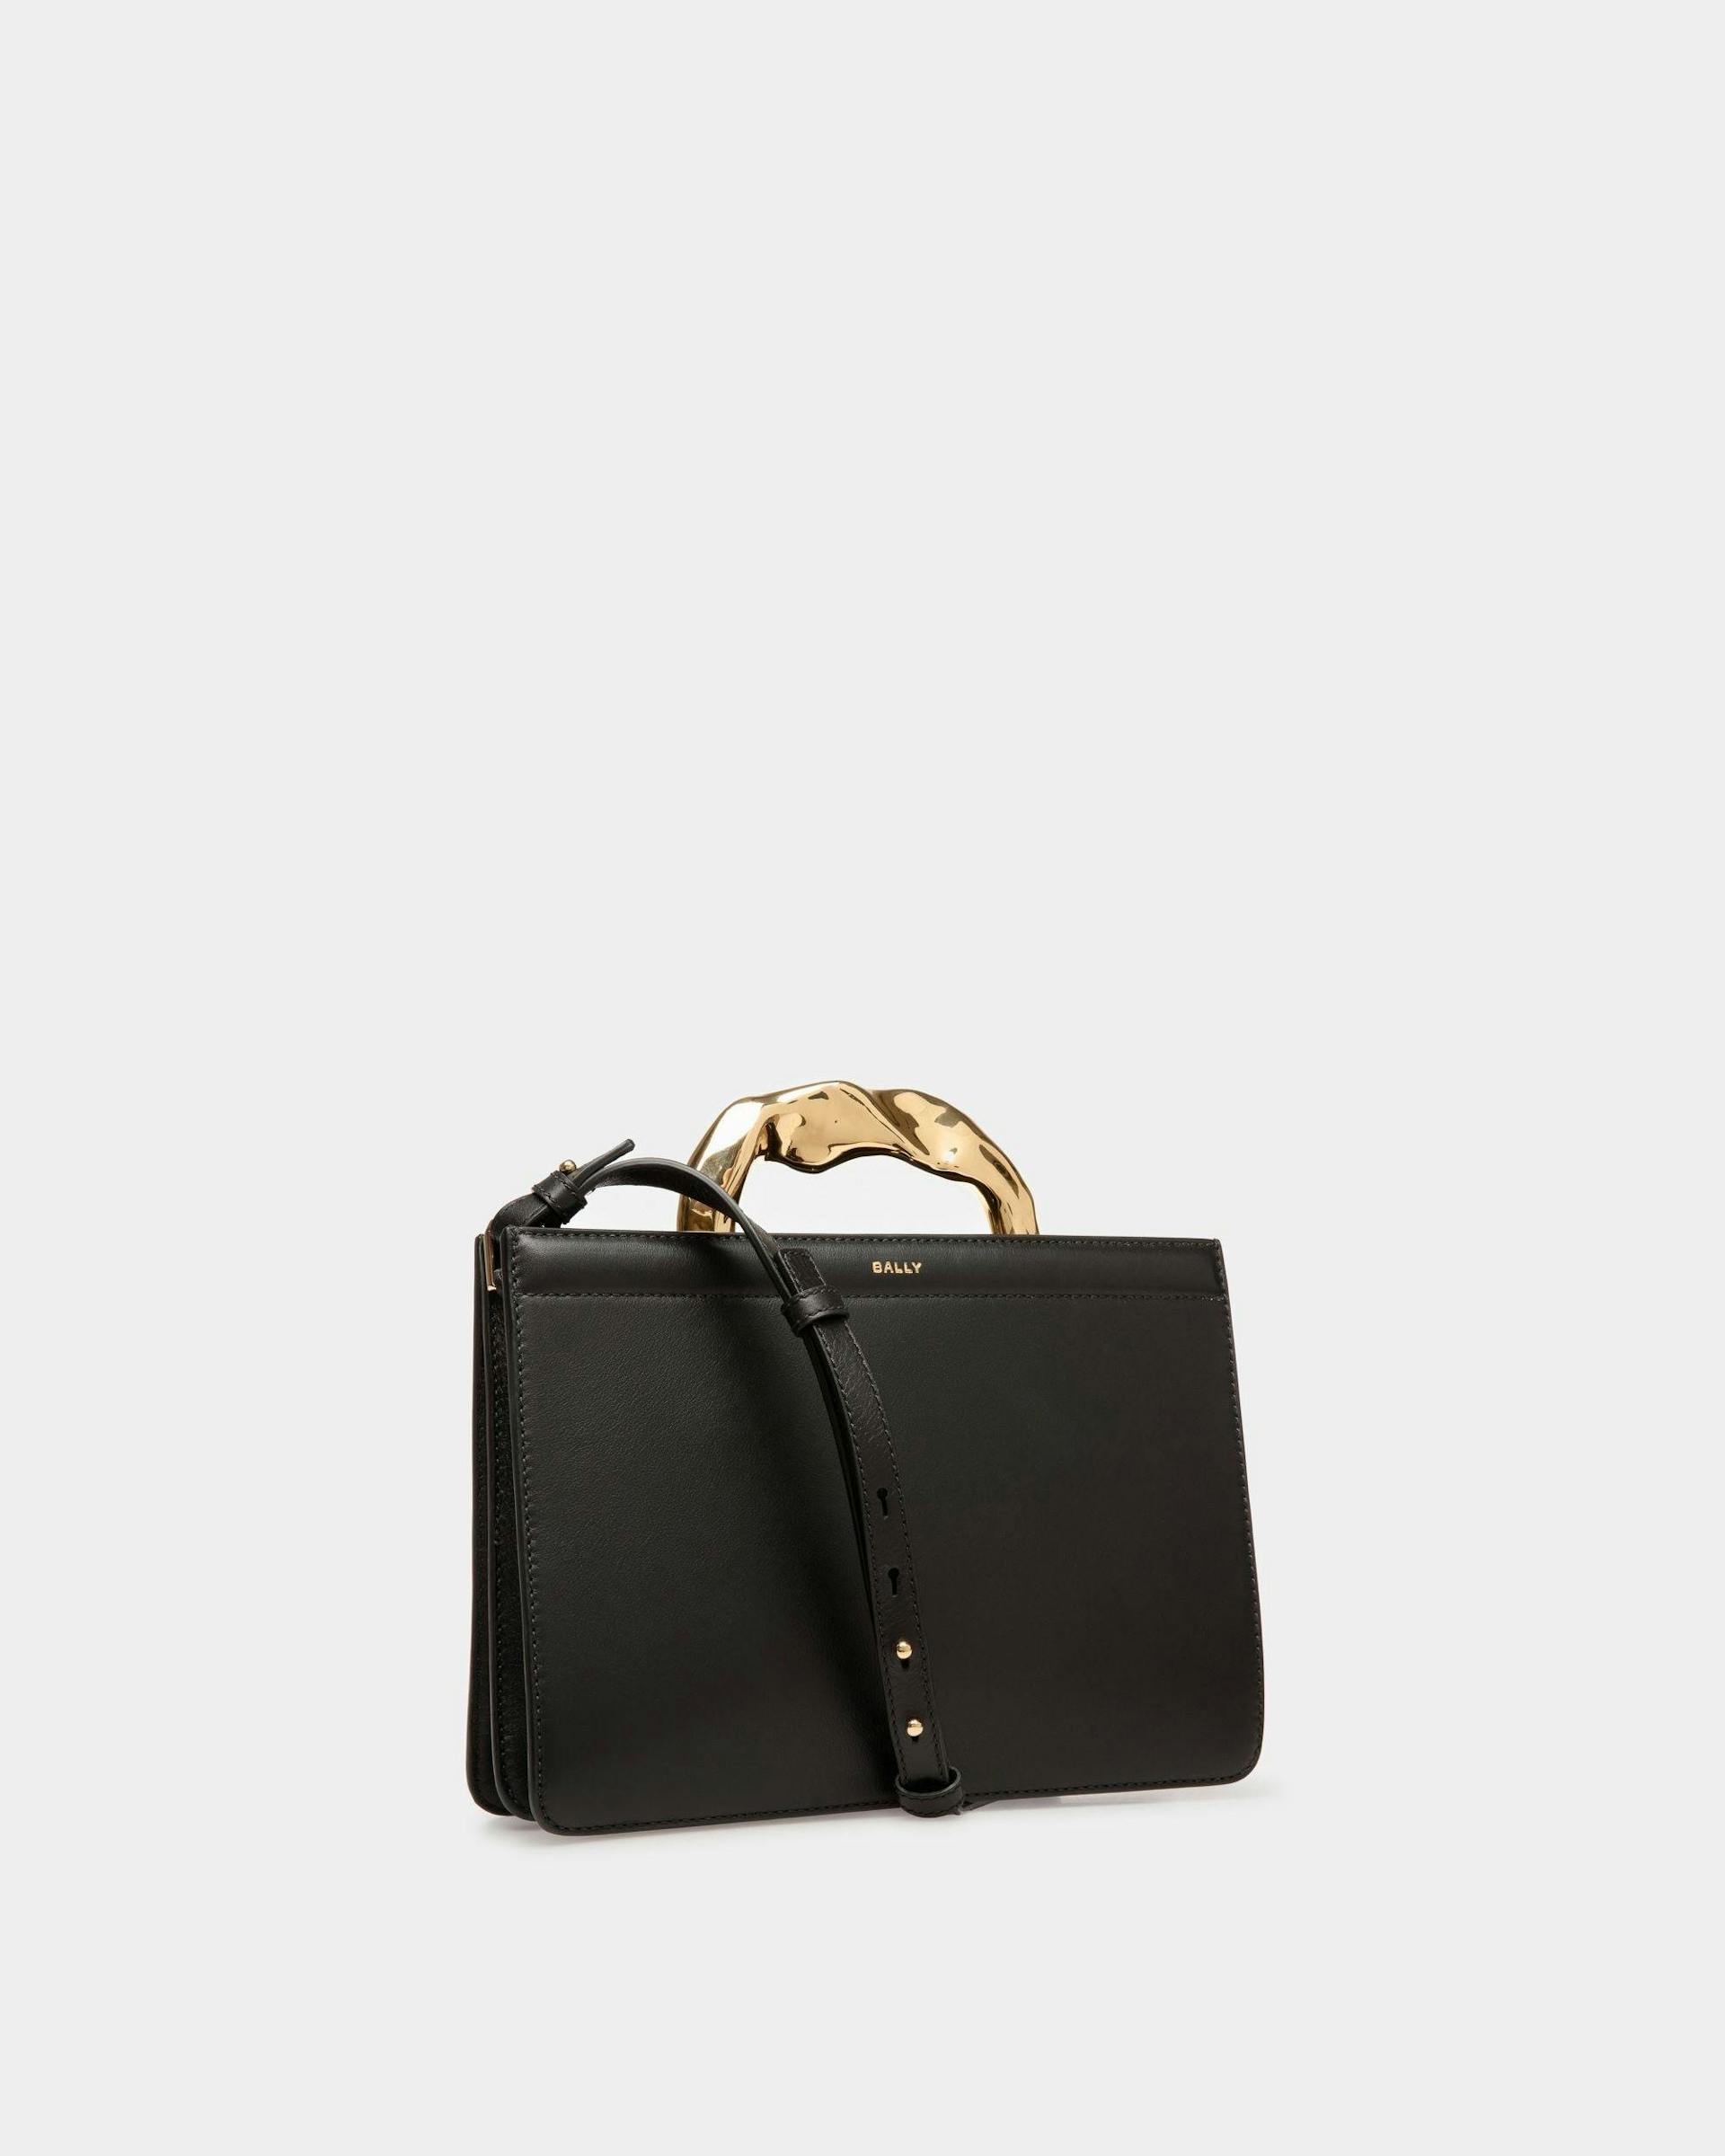 Women's Baroque Top Handle Bag In Black Leather | Bally | Still Life 3/4 Front